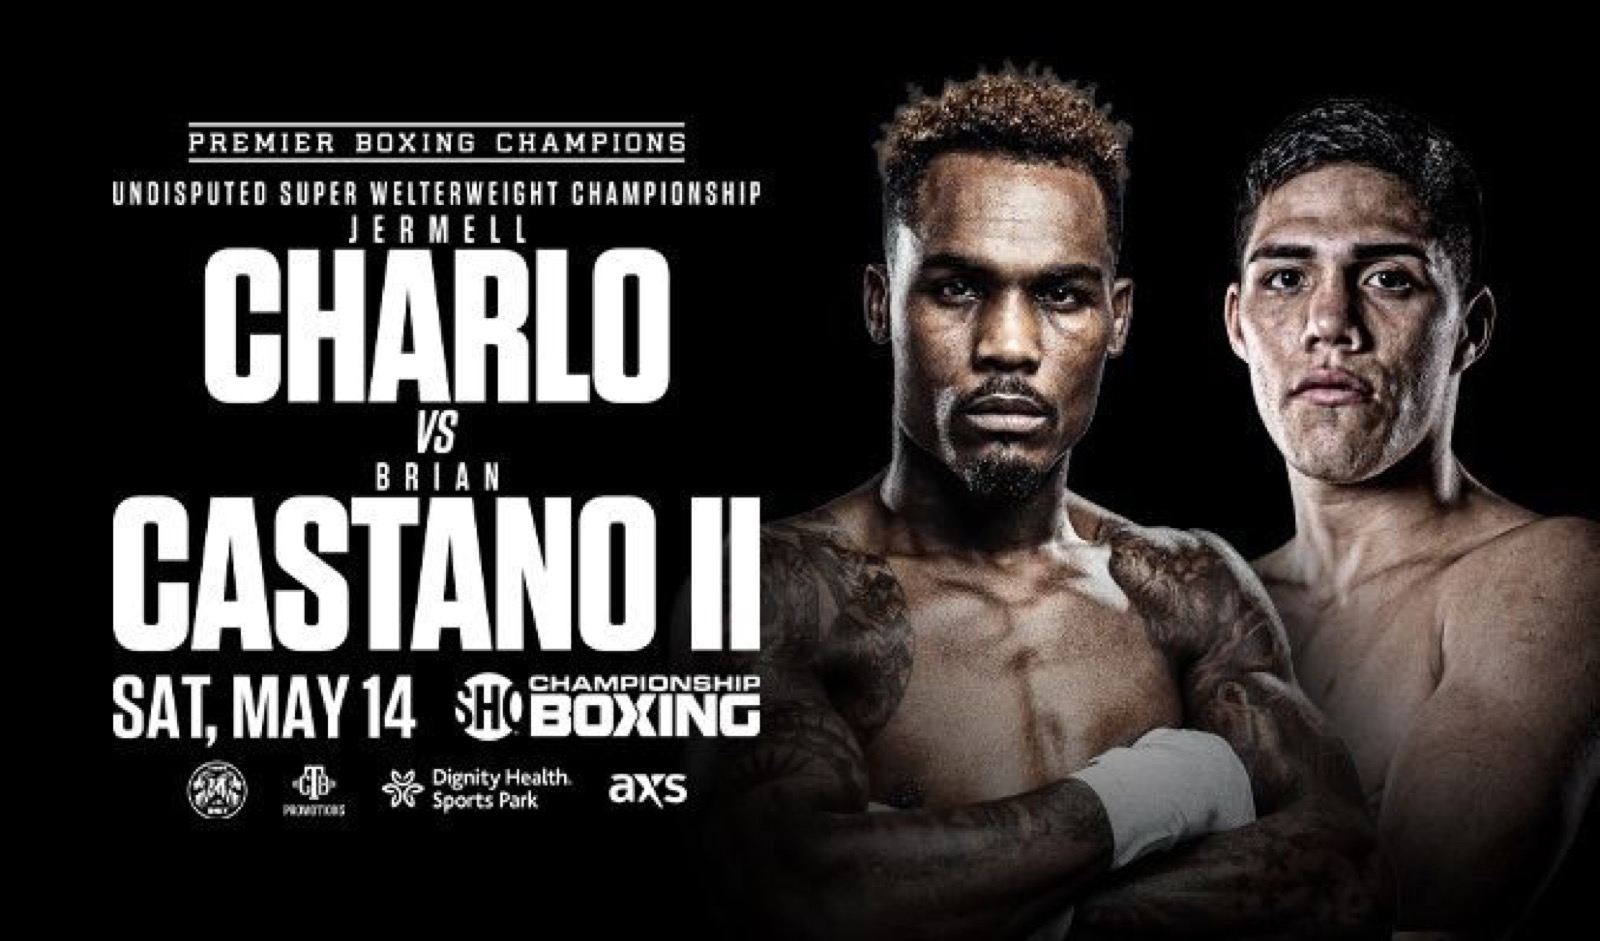 Image: Jermell Charlo says he'll "Smash" Brian Castano if he pressures on May 14th